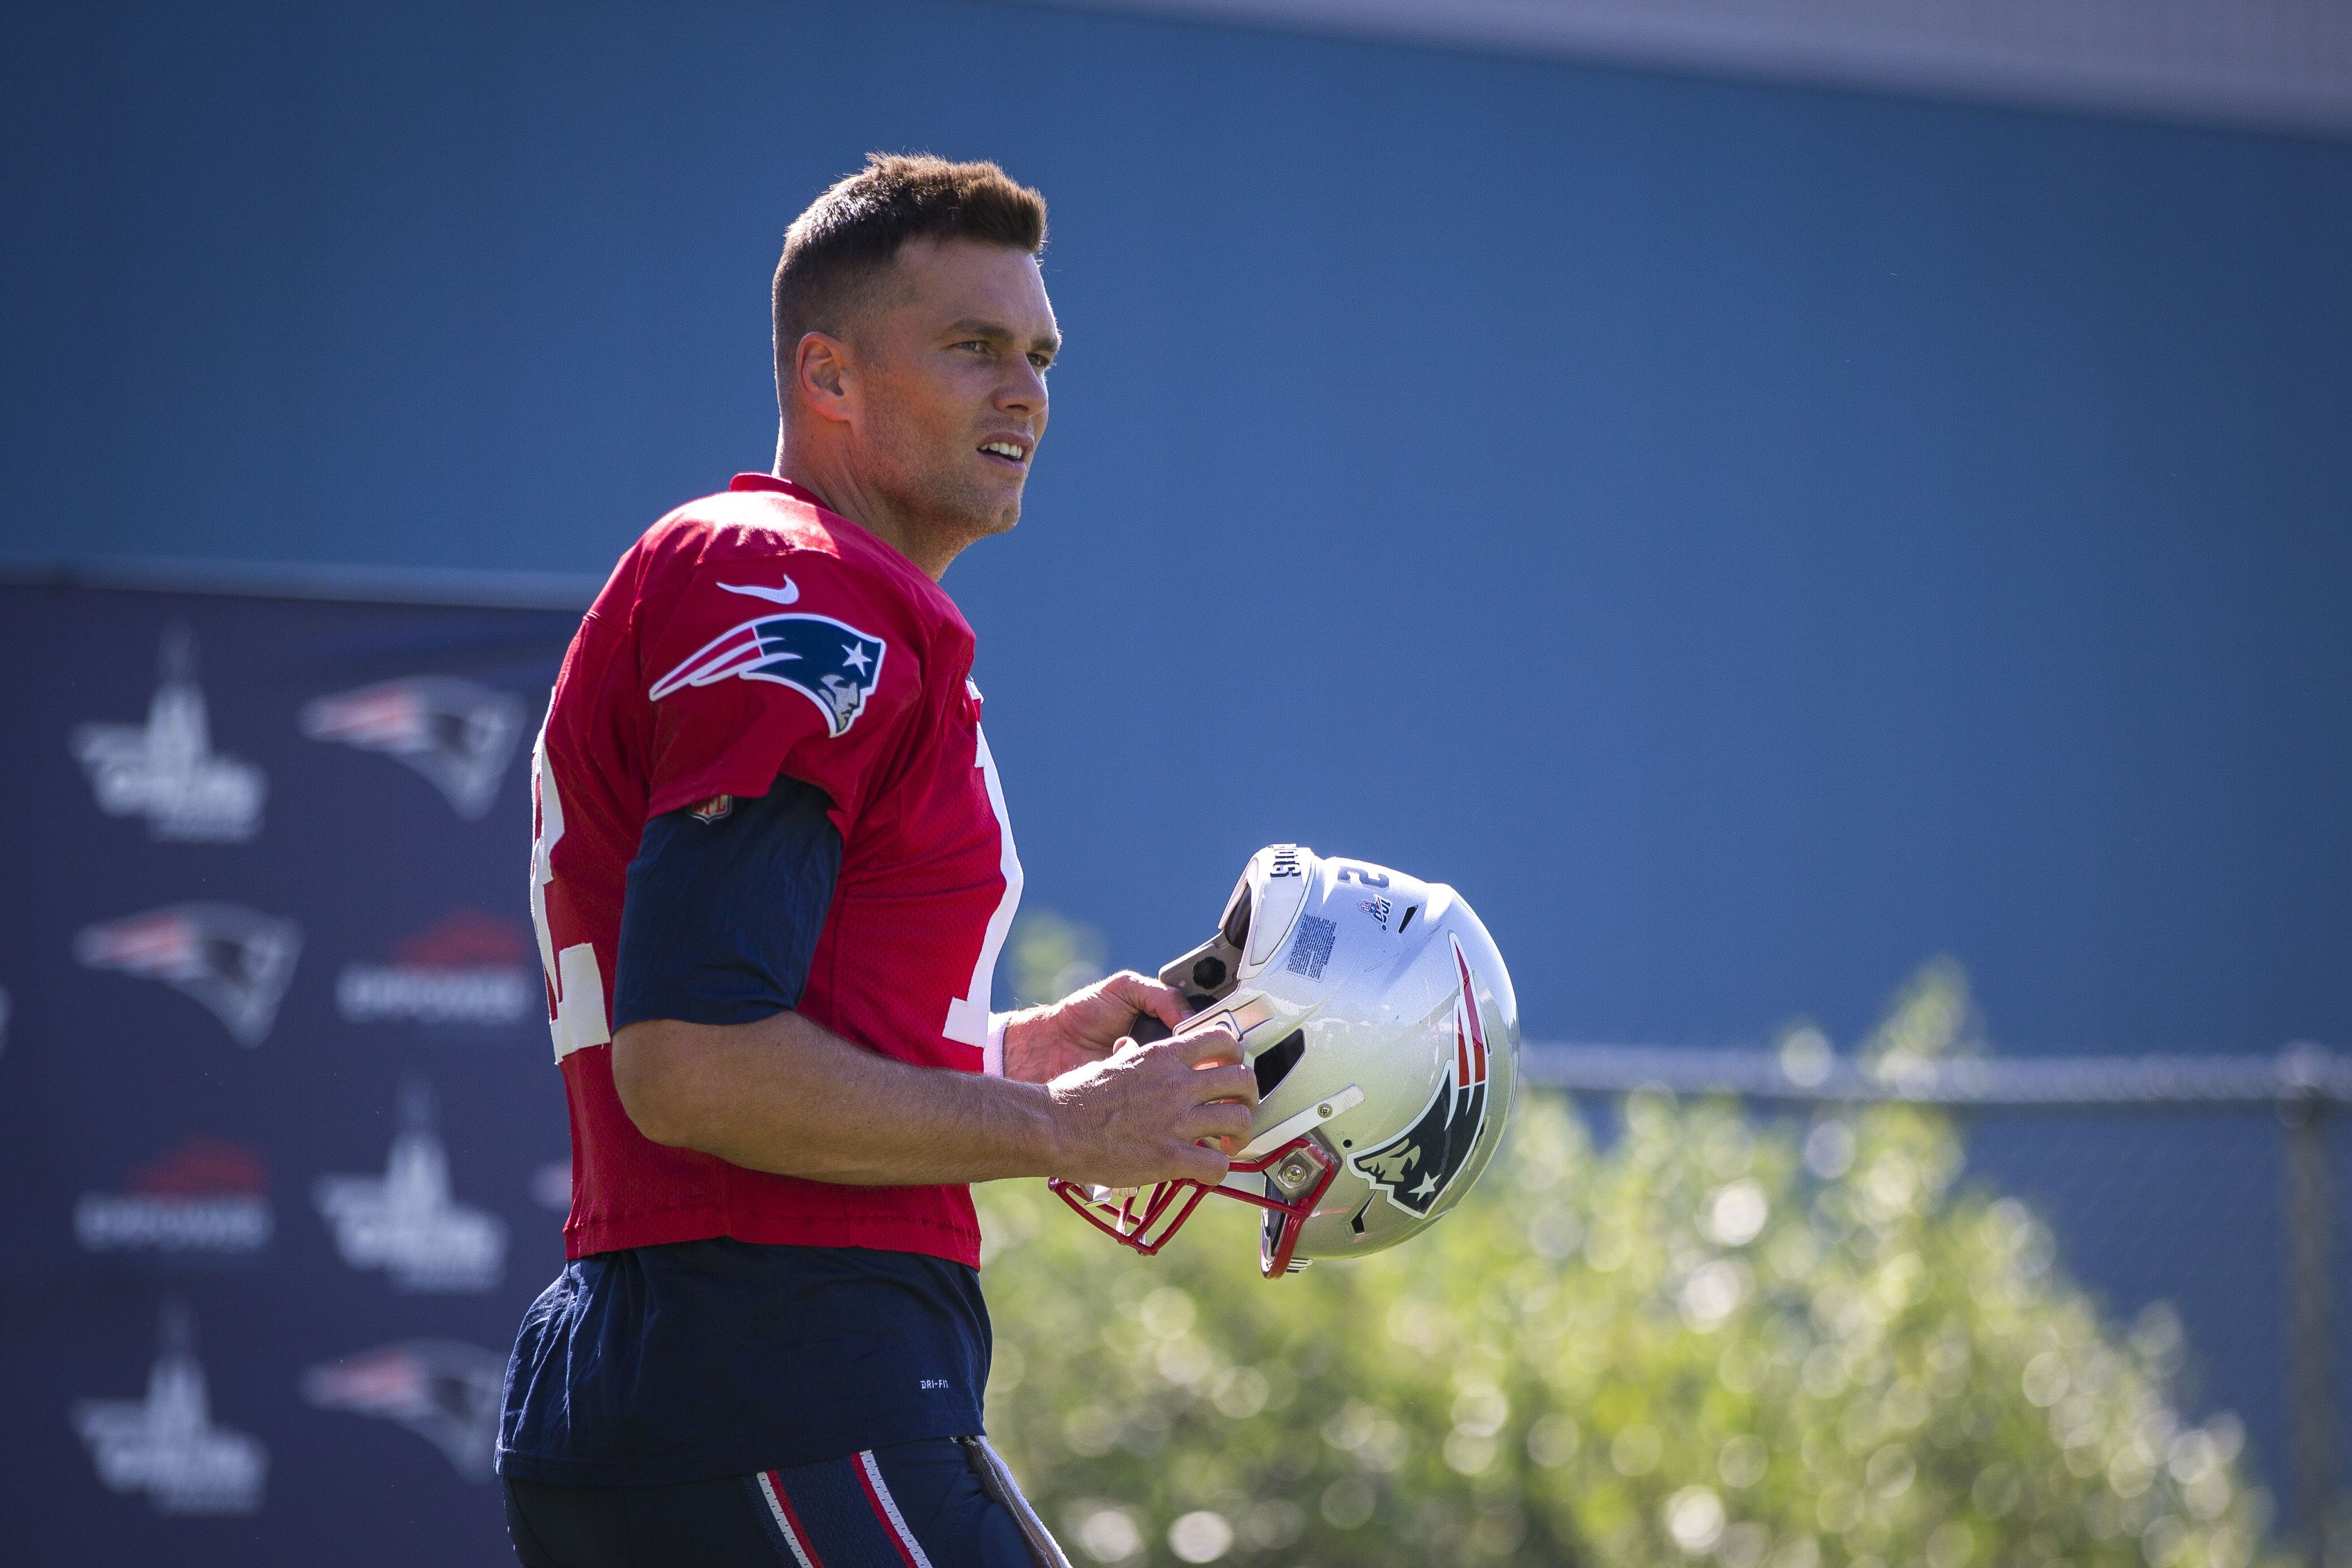 Tom Brady acknowledges he's been in contact with the Patriots